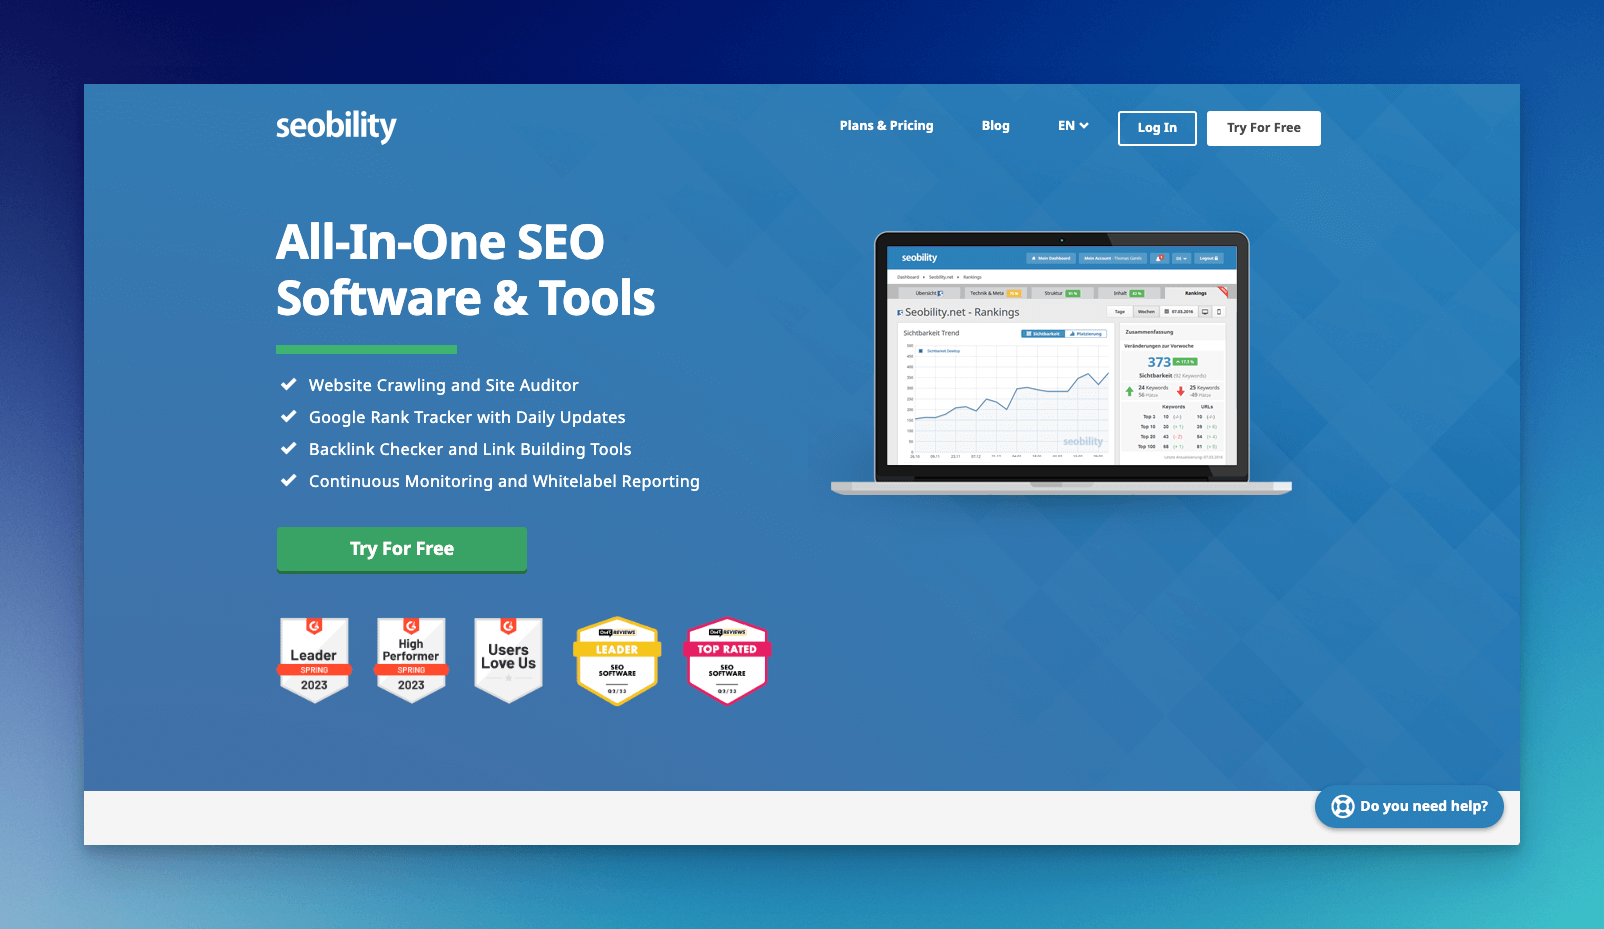 SEObility SEO crawler tool homepage with a blue background and a copy that says "All in one SEO software & tools"